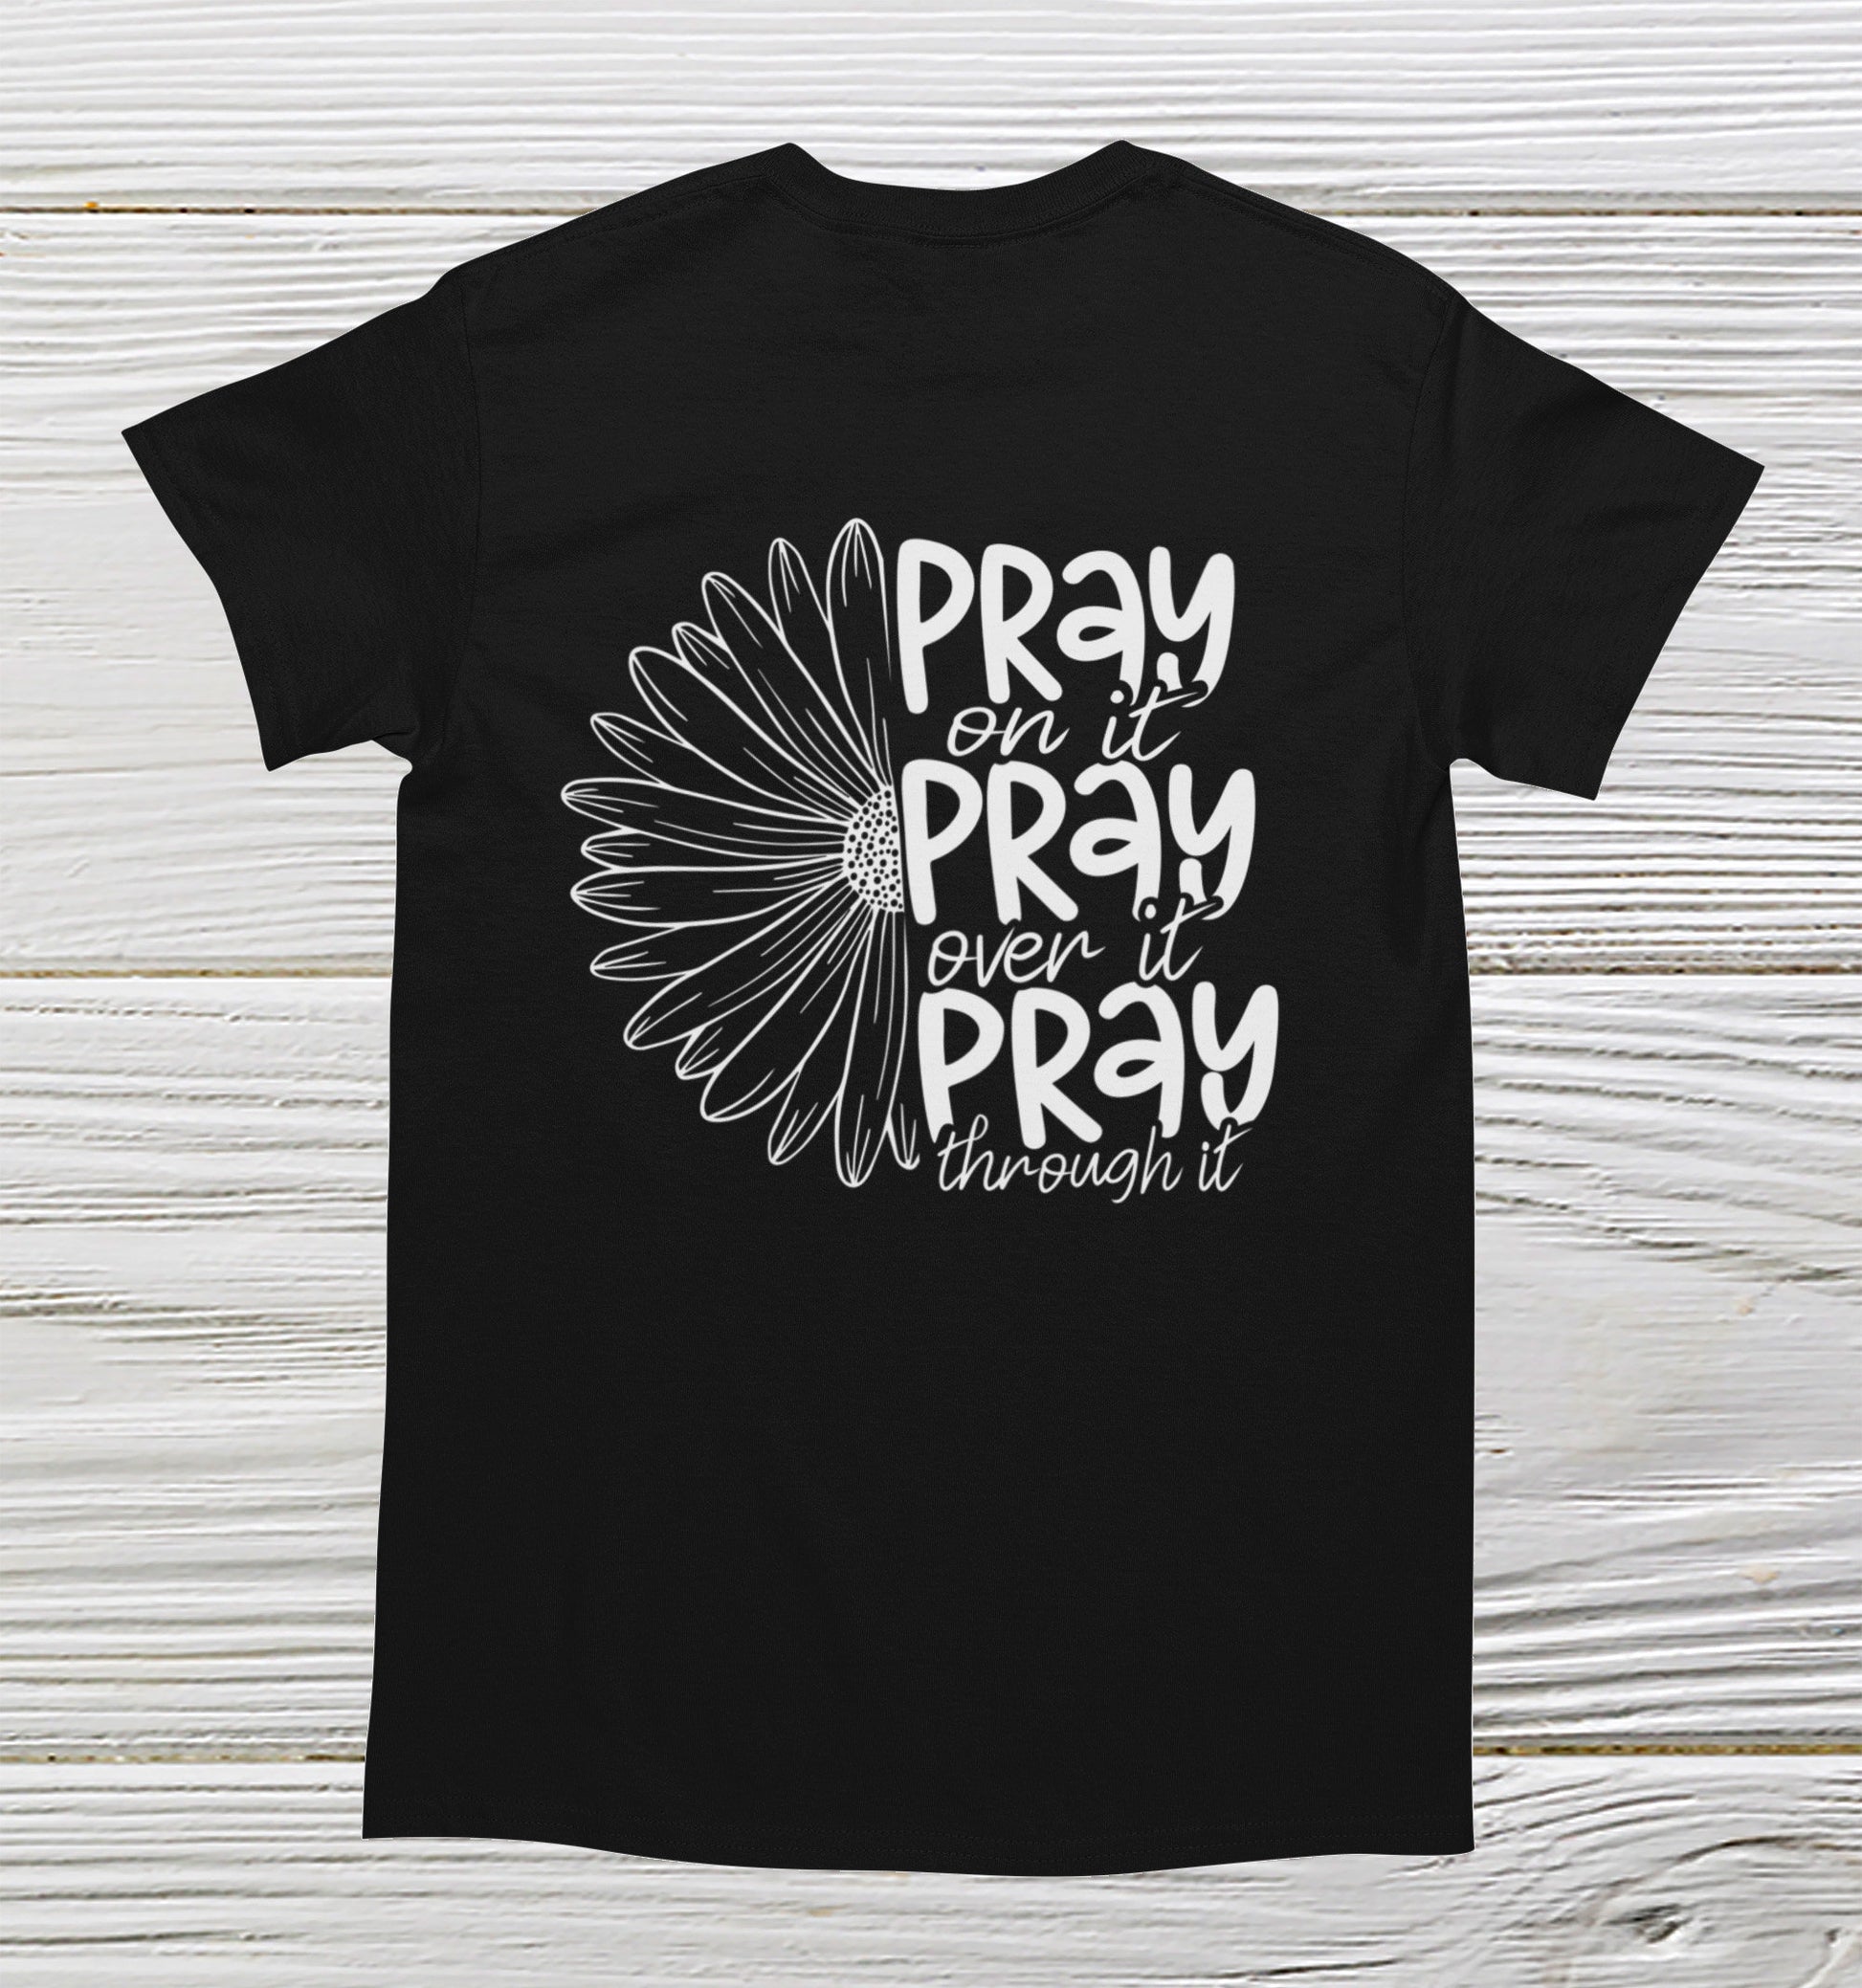  Christian shirt Pray on it, Pray over it, Pray thorough it in black  color 